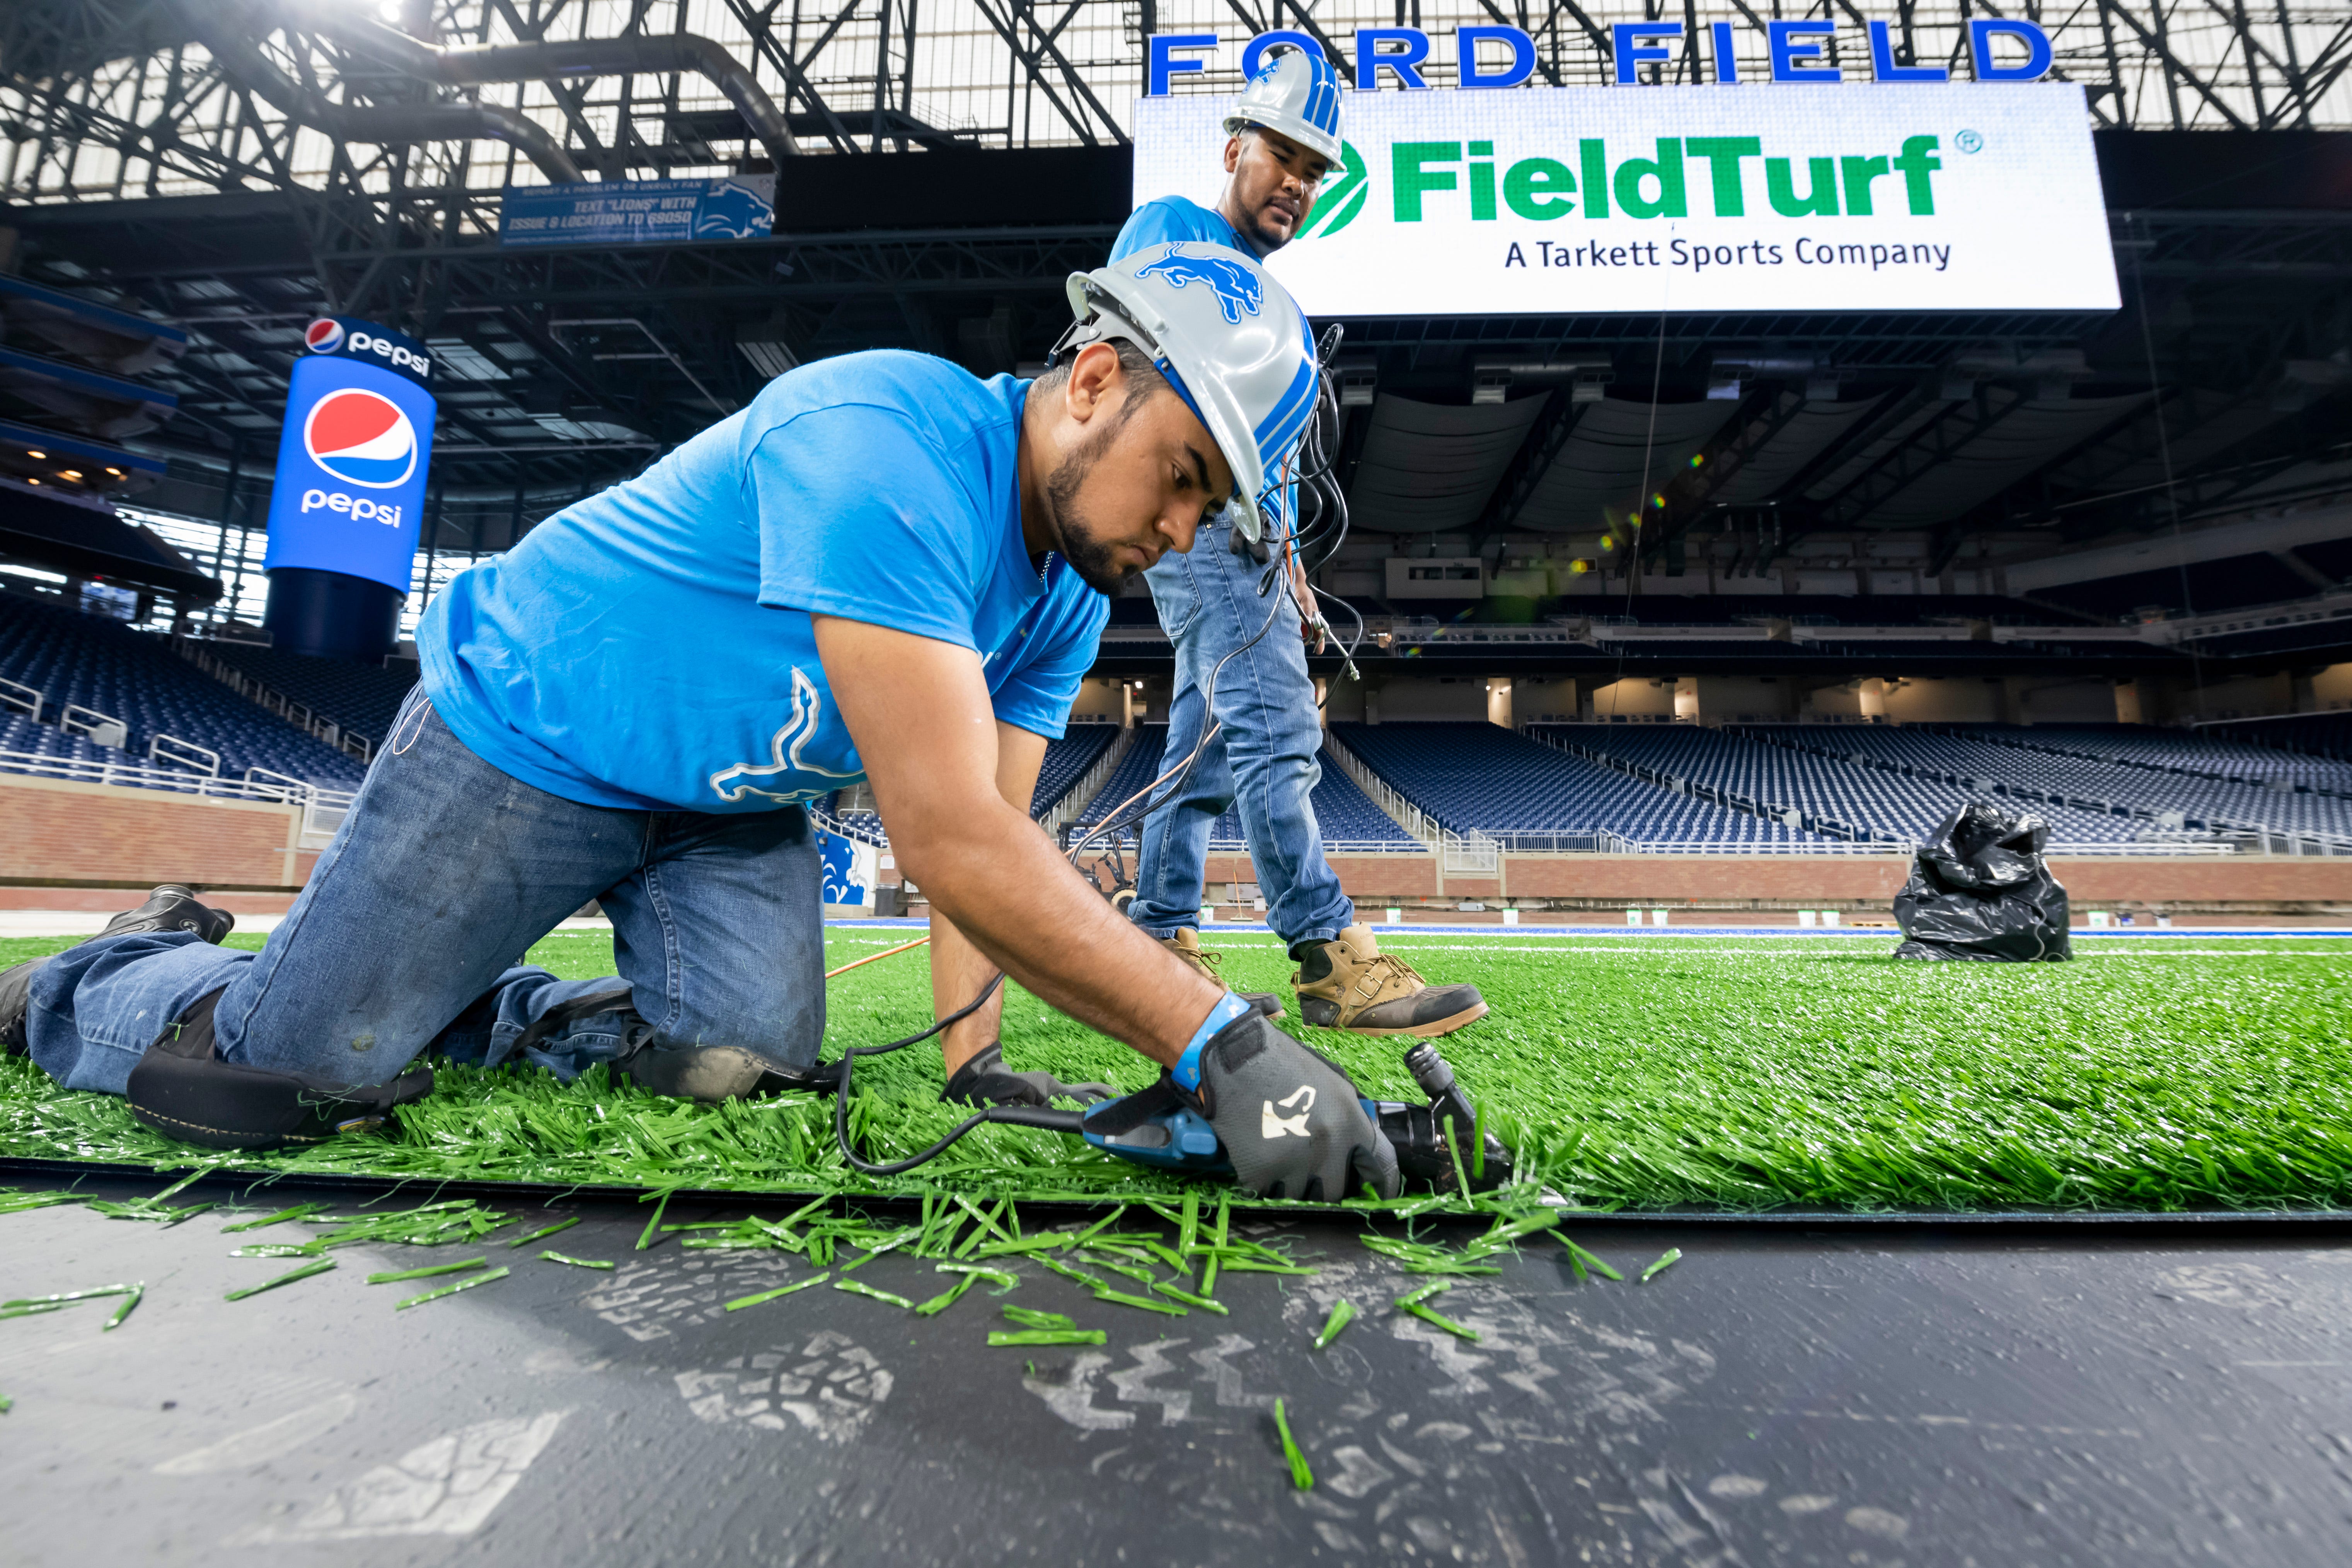 FieldTurf employee Jesus Casteneda uses sheep shearers to trim the edge of a piece of the playing surface during installation at Ford Field.